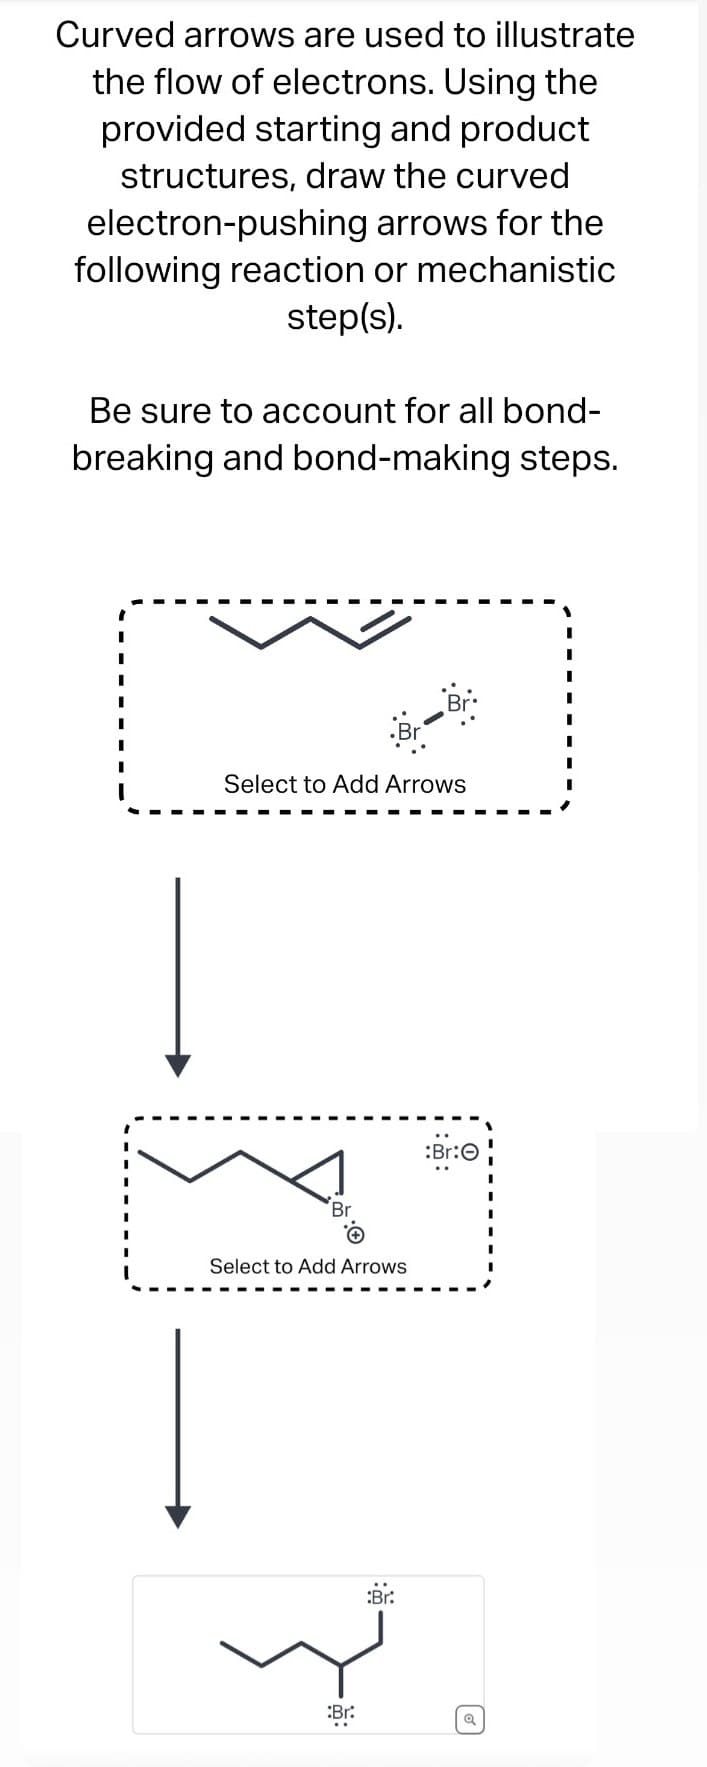 Curved arrows are used to illustrate
the flow of electrons. Using the
provided starting and product
structures, draw the curved
electron-pushing arrows for the
following reaction or mechanistic
step(s).
Be sure to account for all bond-
breaking and bond-making steps.
Select to Add Arrows
Br
Select to Add Arrows
:Br:
لا
:Br:
- :
م)
:Br:O